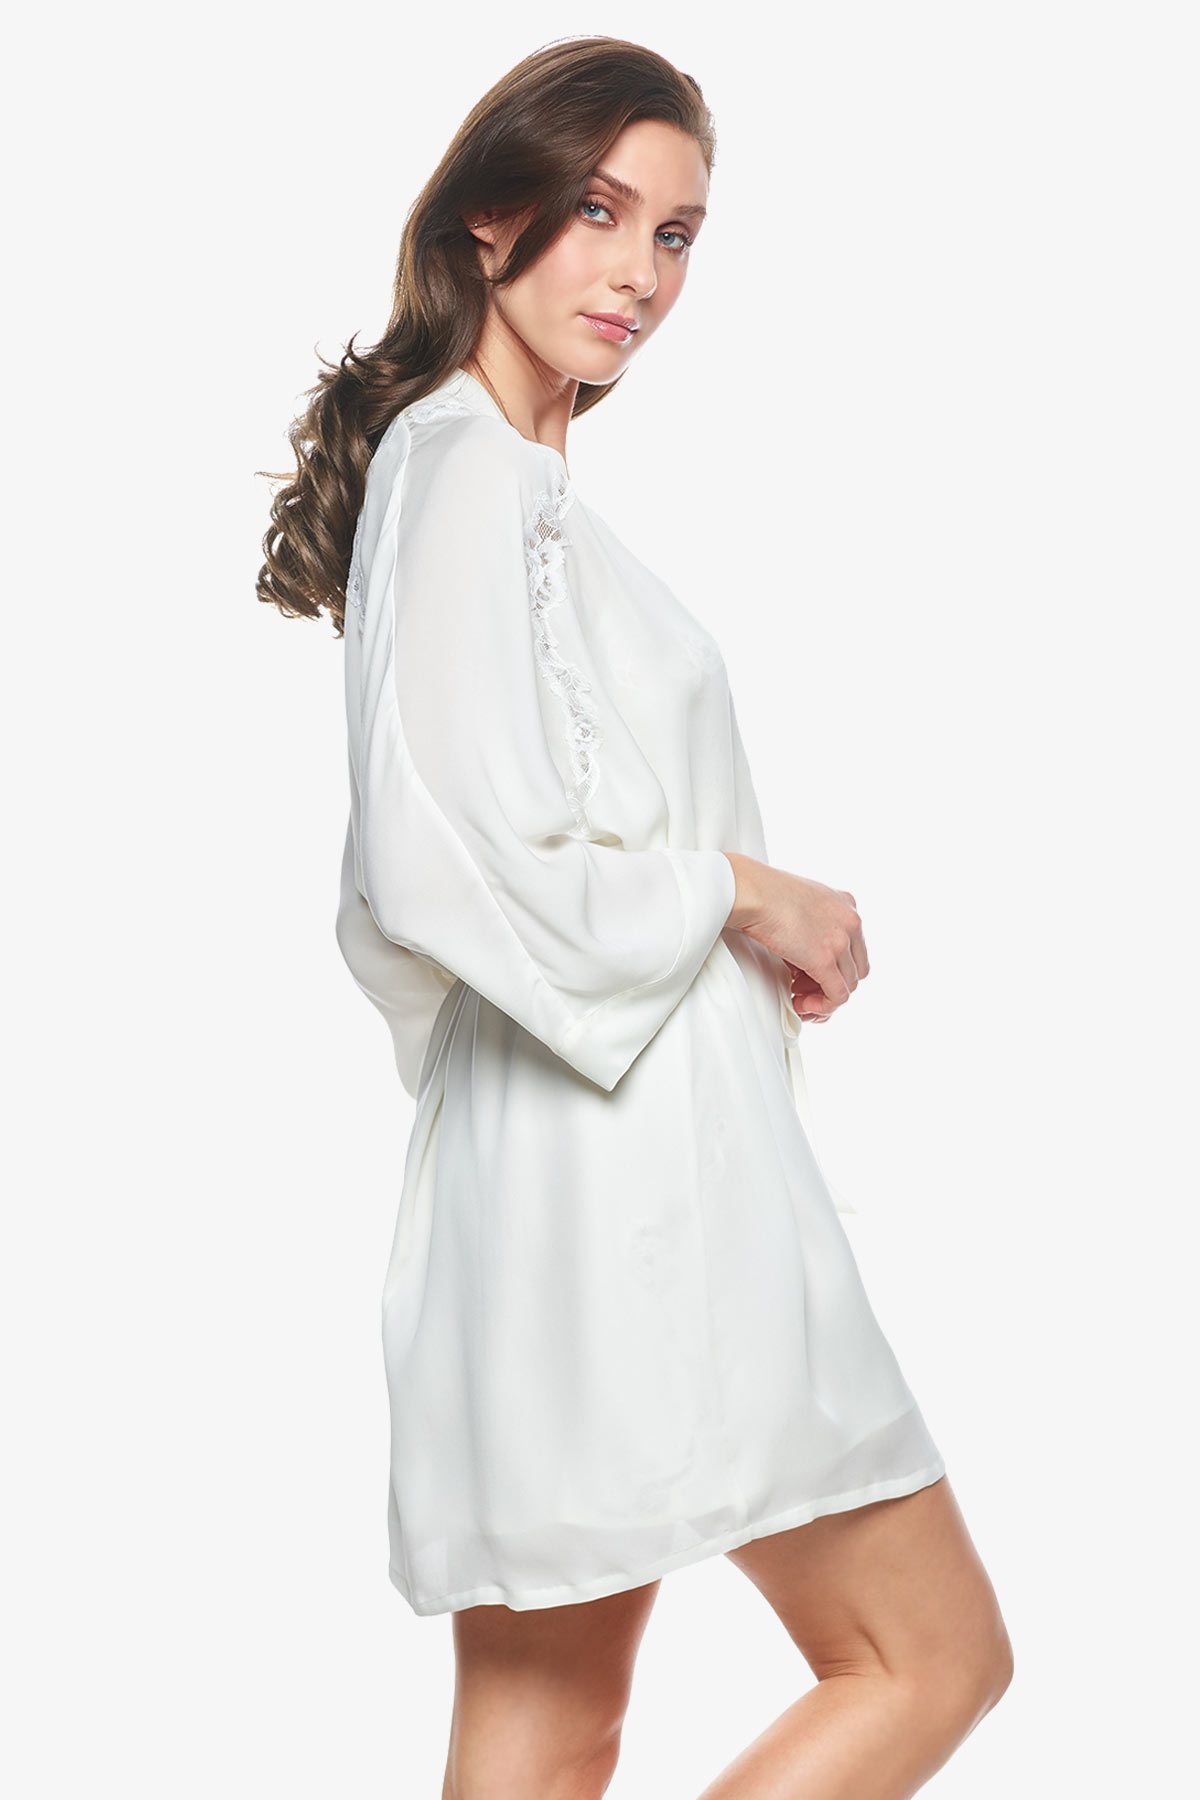 Sideview of model wearing Sigrid short bridal robes in pearl-white